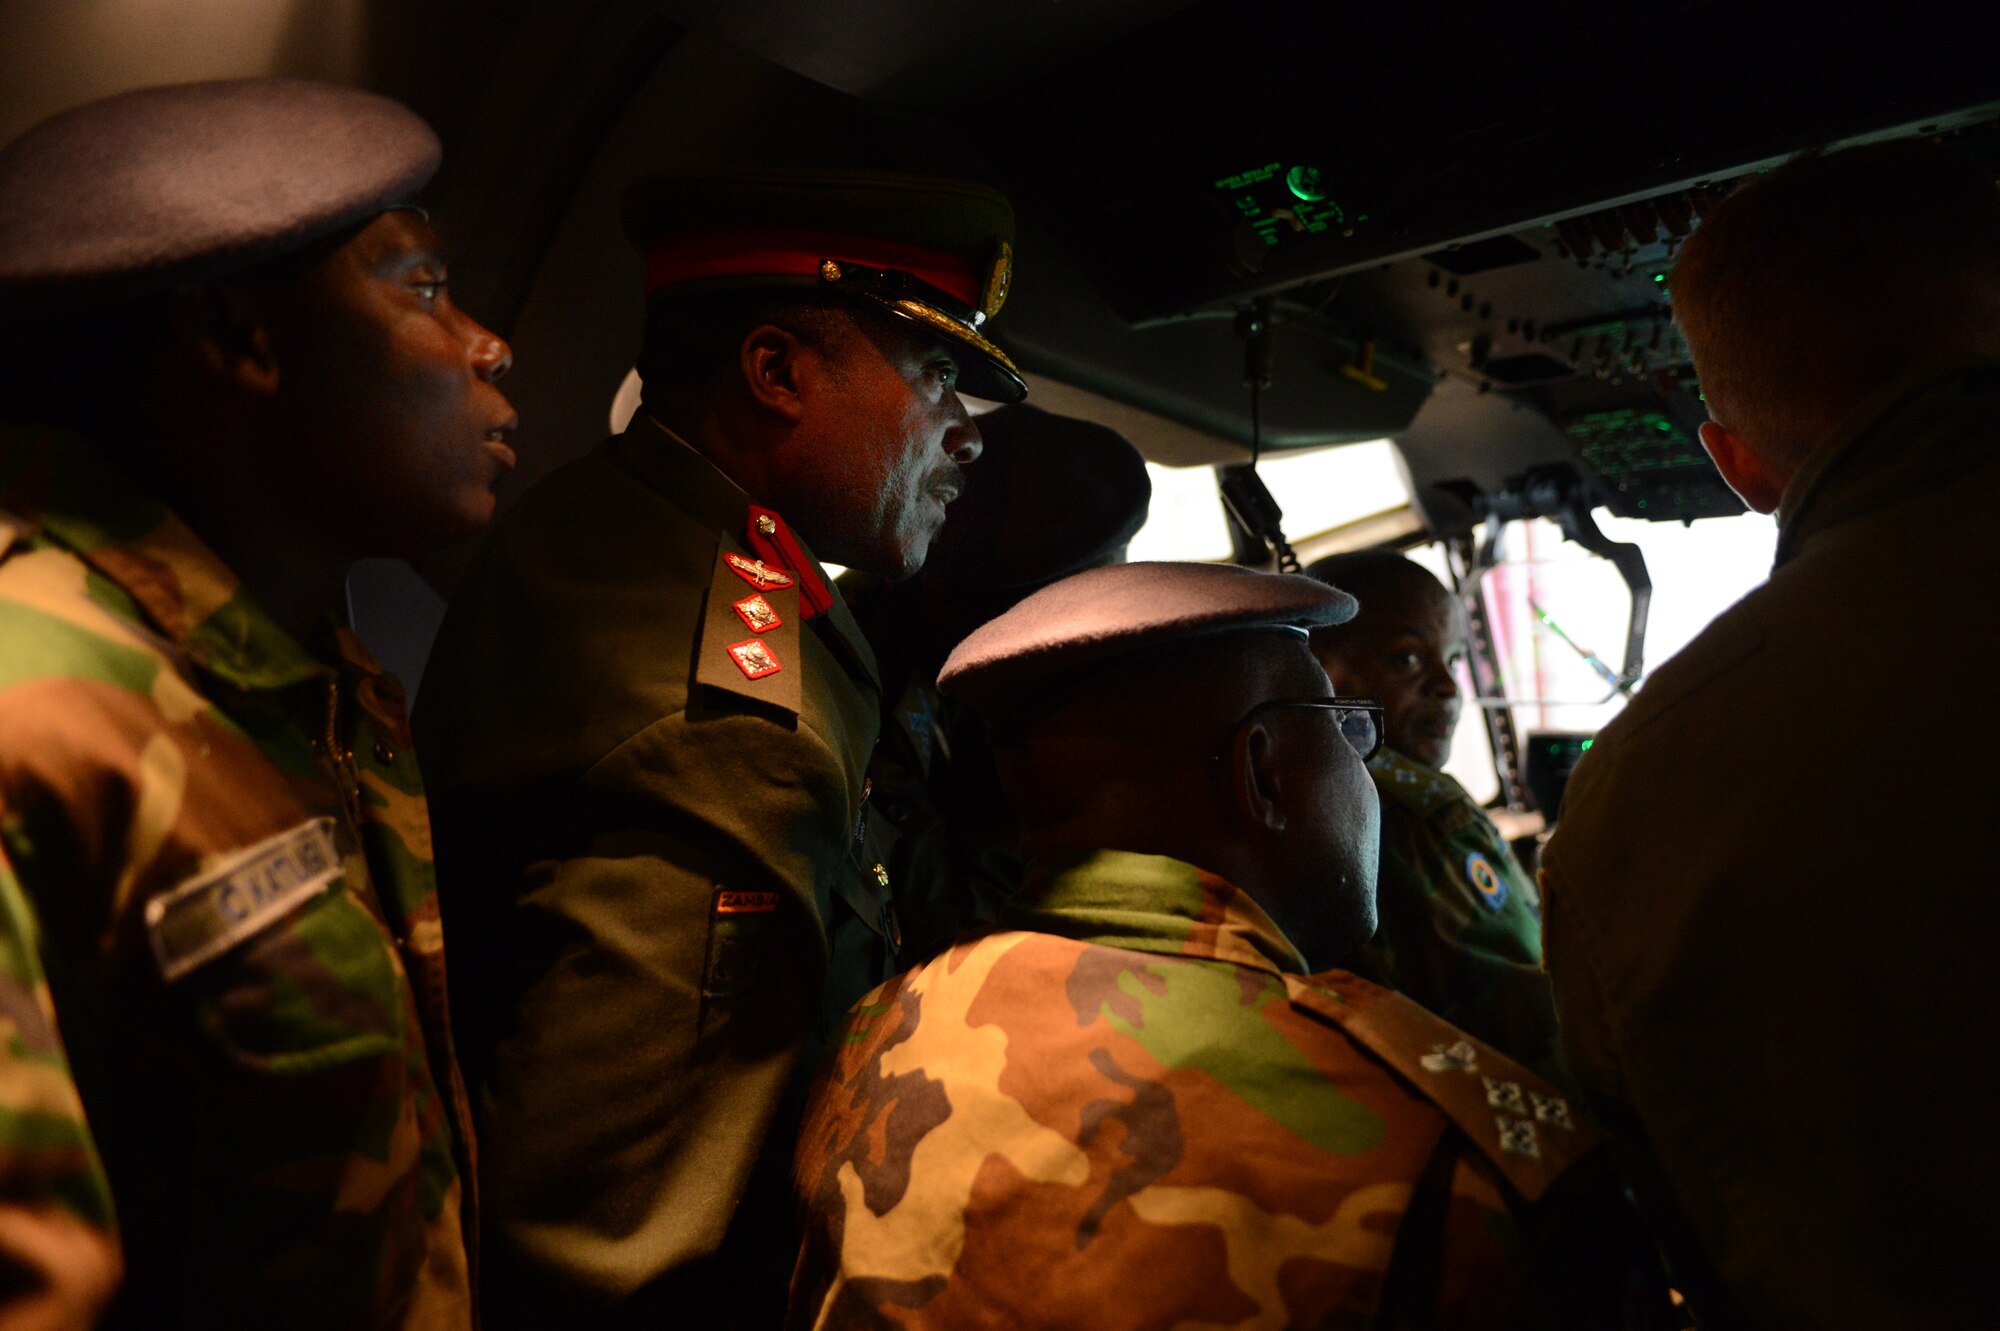 Lt. Gen. Eric Chimese, Zambian air force commander, along with a team of senior military officials tour a C-130 J Super Hercules flight deck, April 29, 2013, Ramstein Air Base, Germany. The visit gave the Zambian air force a chance to further military relations and improve the partnership between the U.S. and Zambian air forces. (U.S. Air Force photo/Senior Airman Caitlin O’Neil-McKeown)